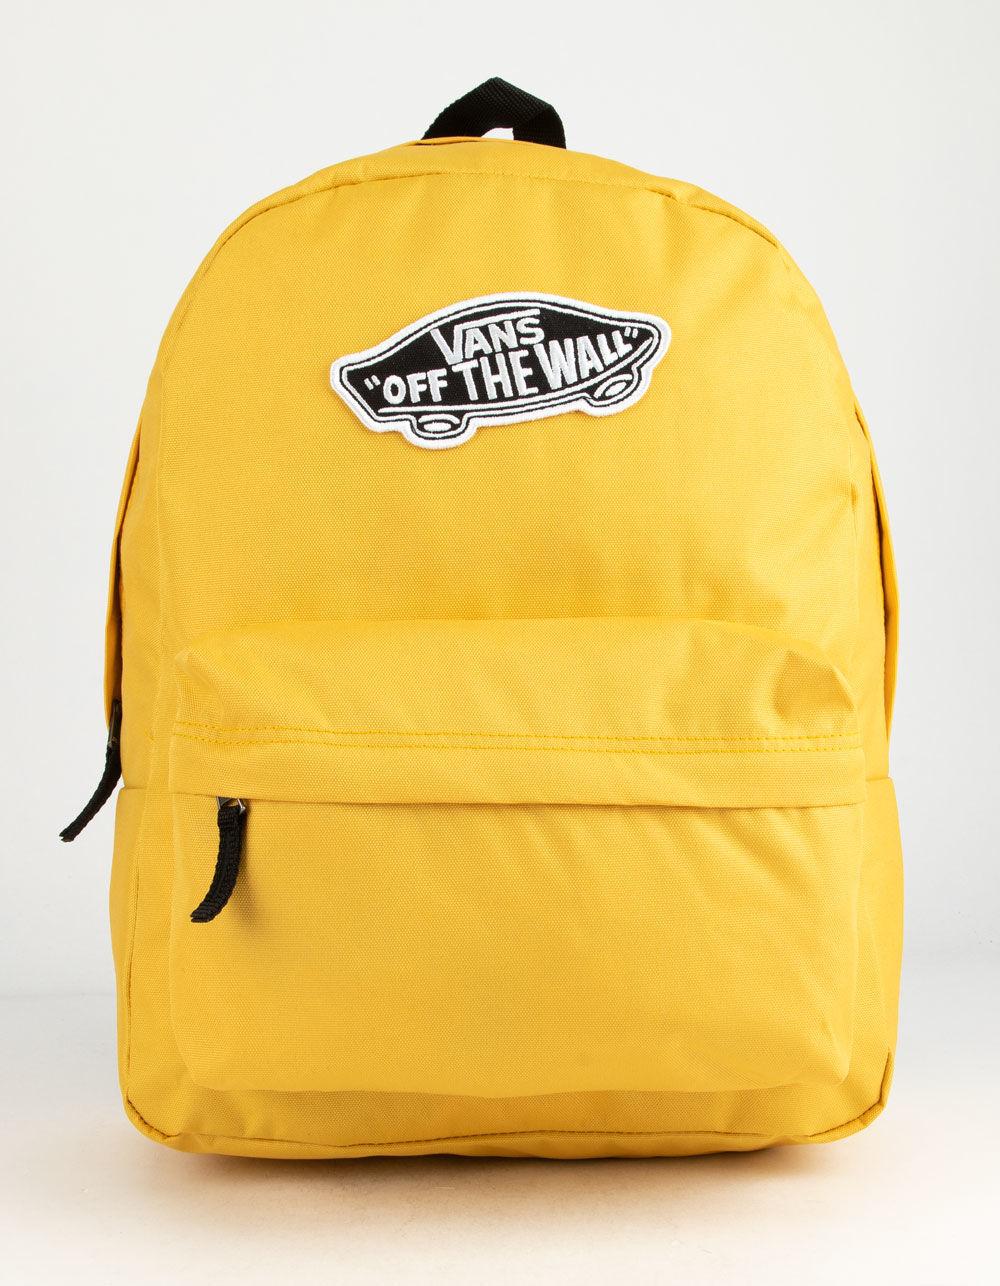 Vans Realm Classic Yolk Yellow Backpack in Yellow - Lyst